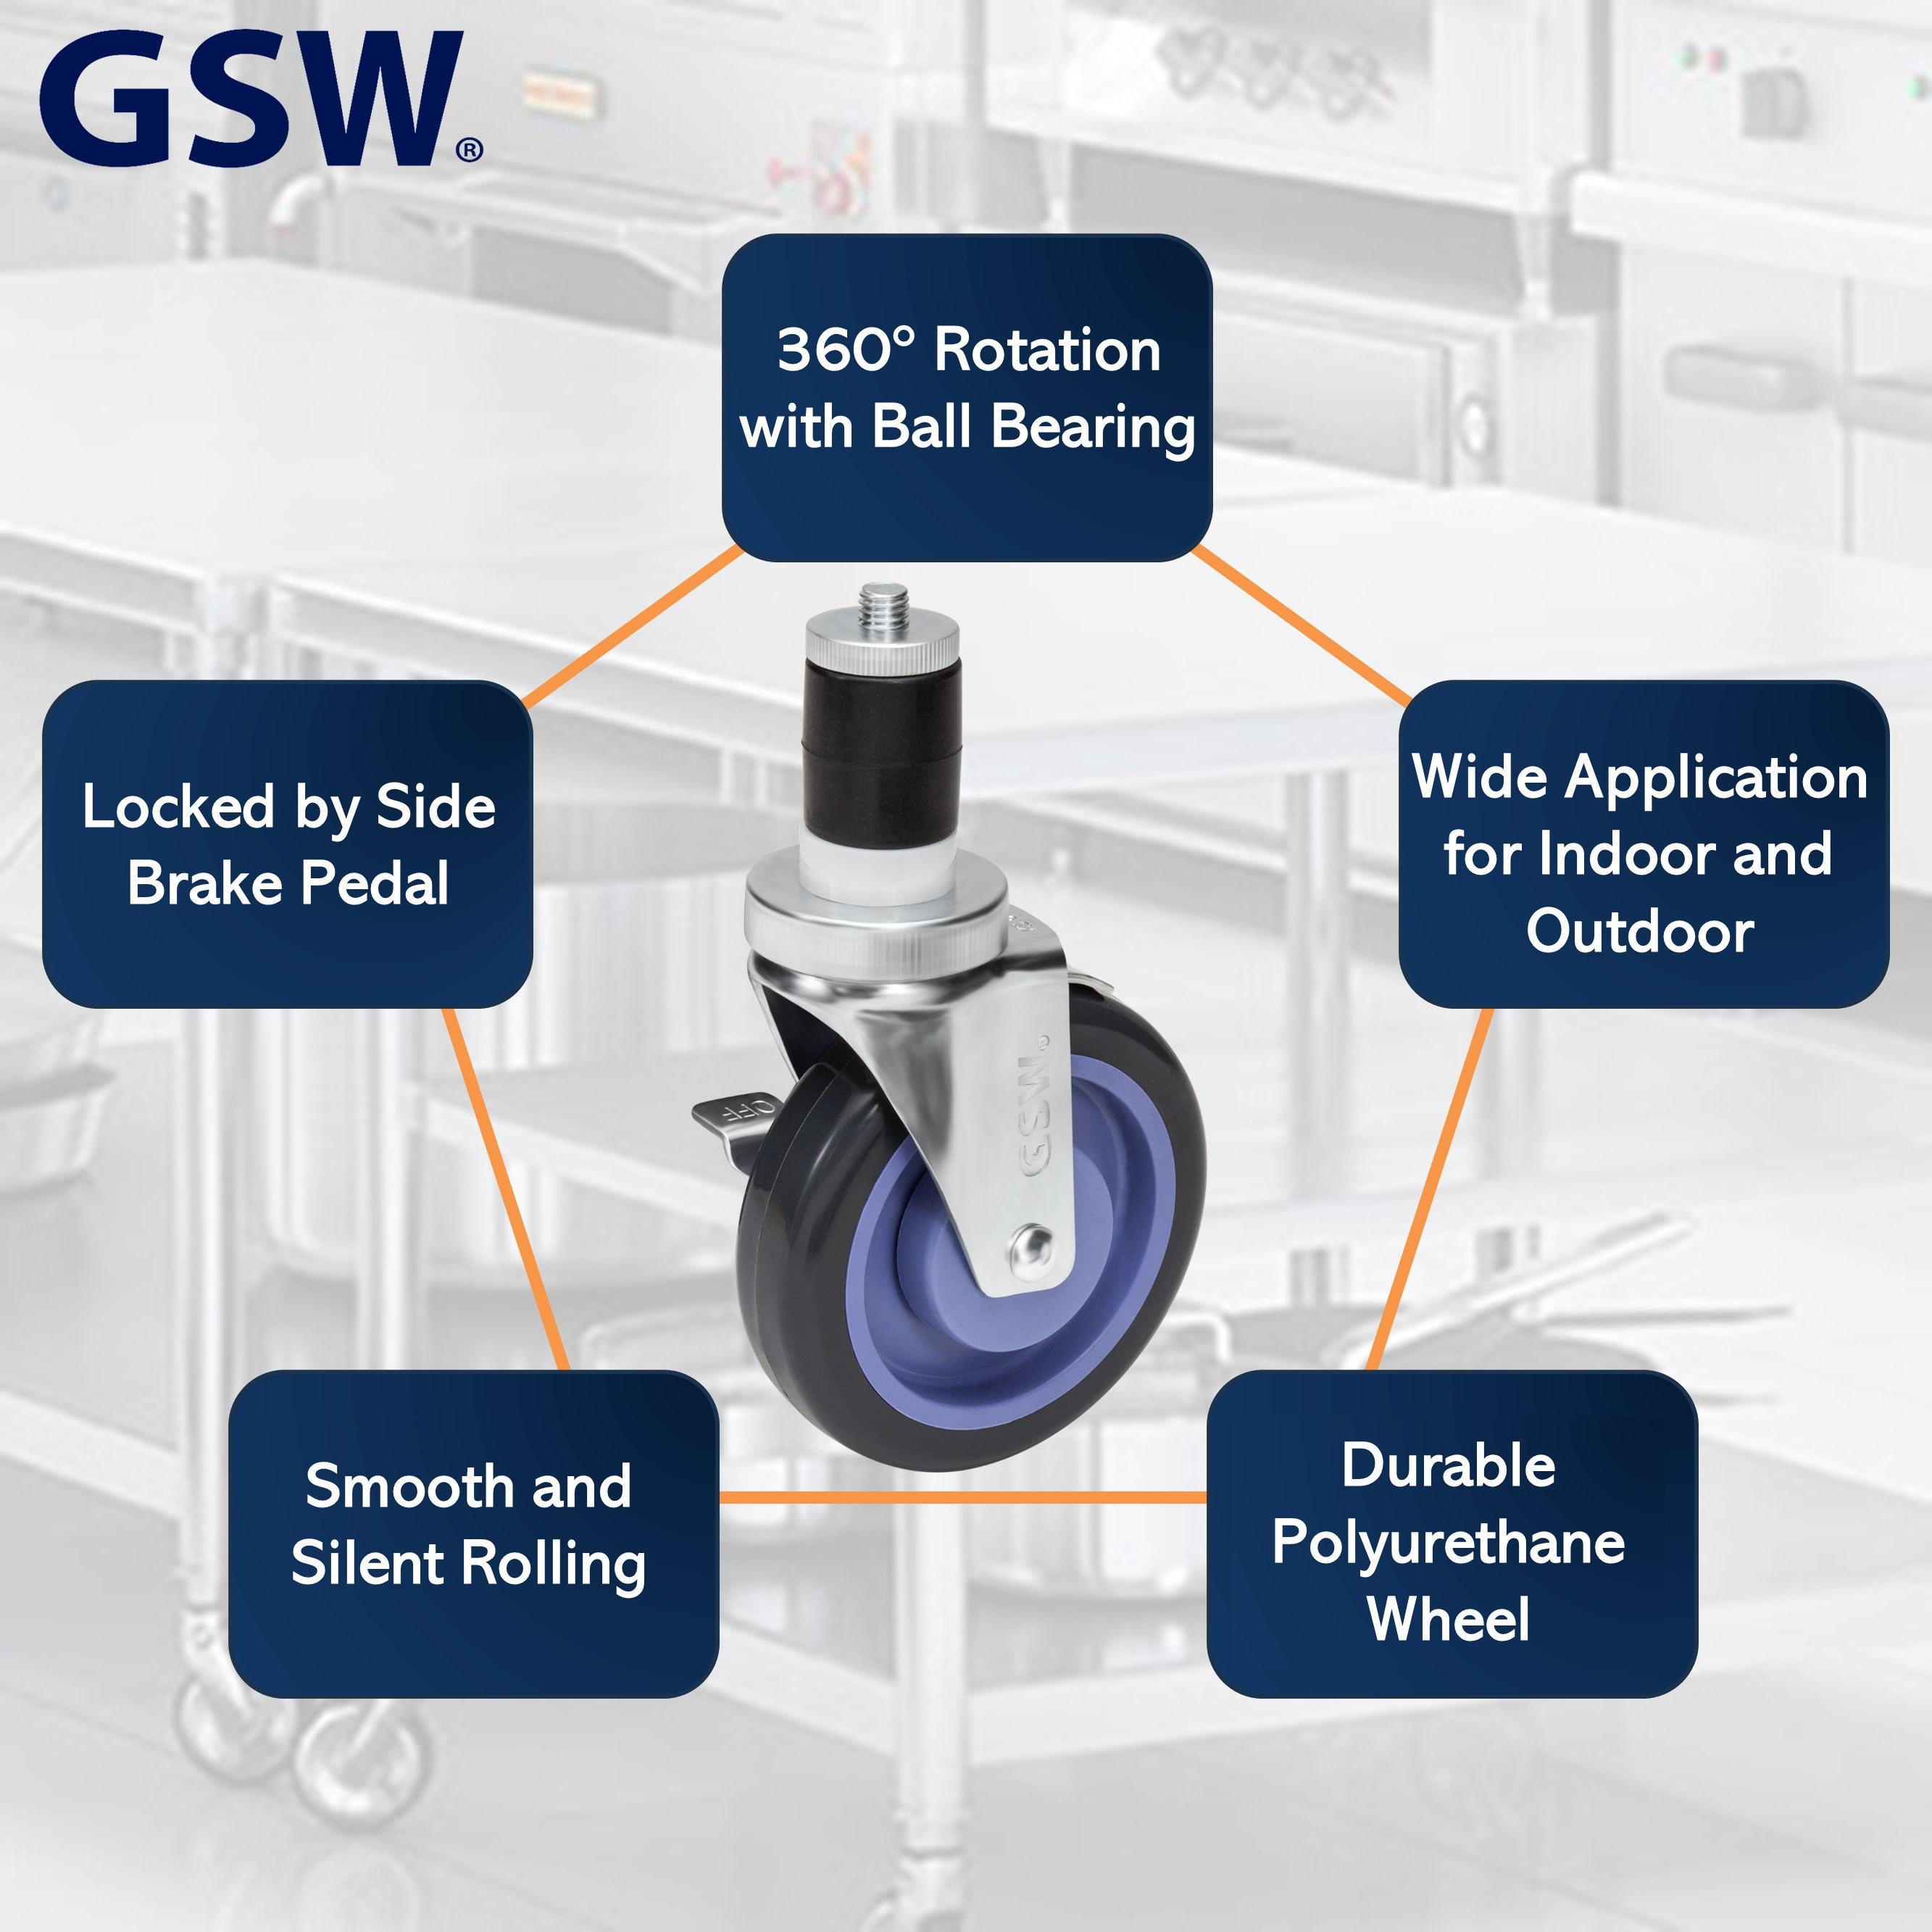 GSW 5" Heavy Duty Casters Wheels with Expanding Stem - Loading Capacity: 1480 lbs. Use for Worktables and Equipment Stands (Swivel with Brake)